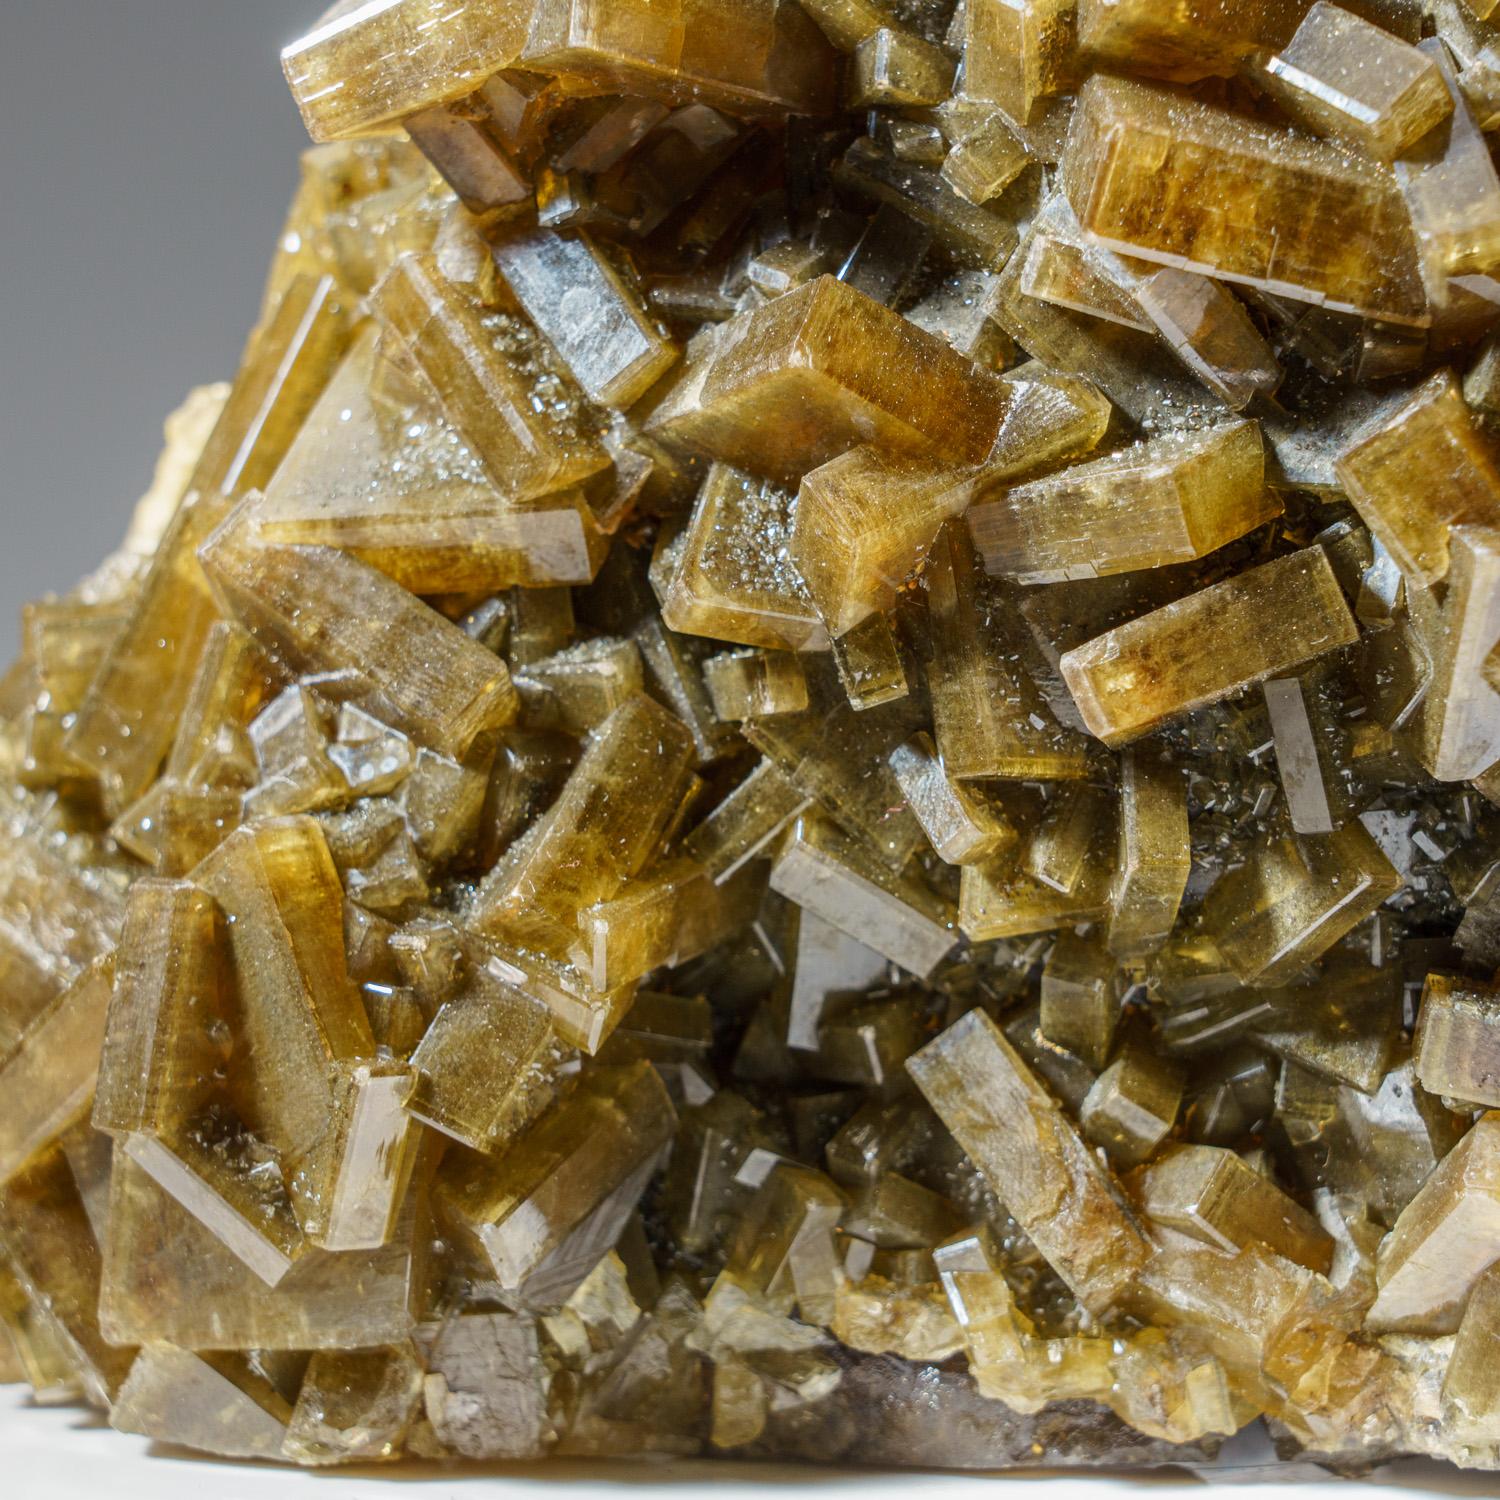 From Nandan County, Hechi, Guangxi, China

Large plate of golden barite crystals to covers all sides, with minimal attachment point on matrix.

 Weight: 4.5 lbs, Dimensions: 6 x 2 x 5 inches.